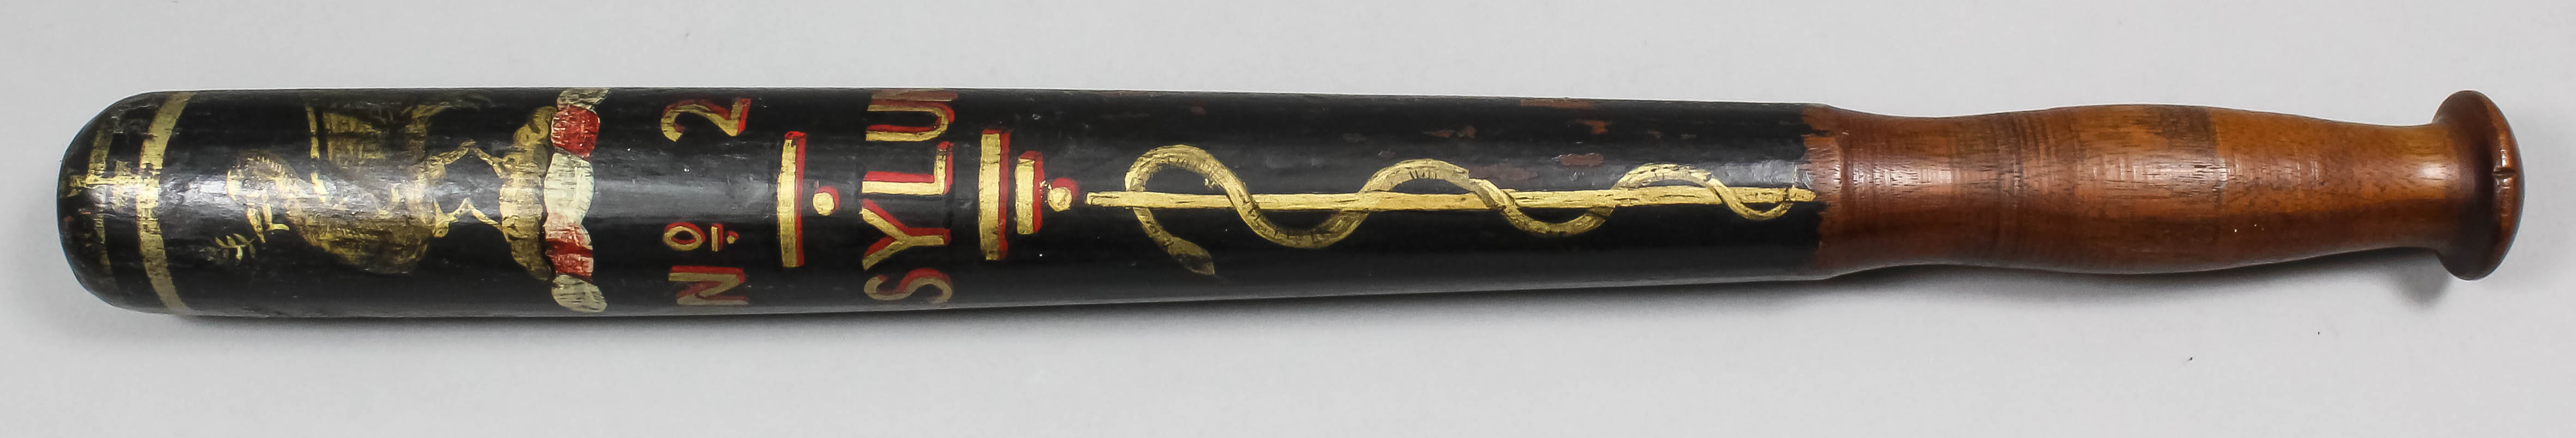 A Victorian turned wood truncheon painted with the heraldic device of a griffin over "No.2.Asylum"